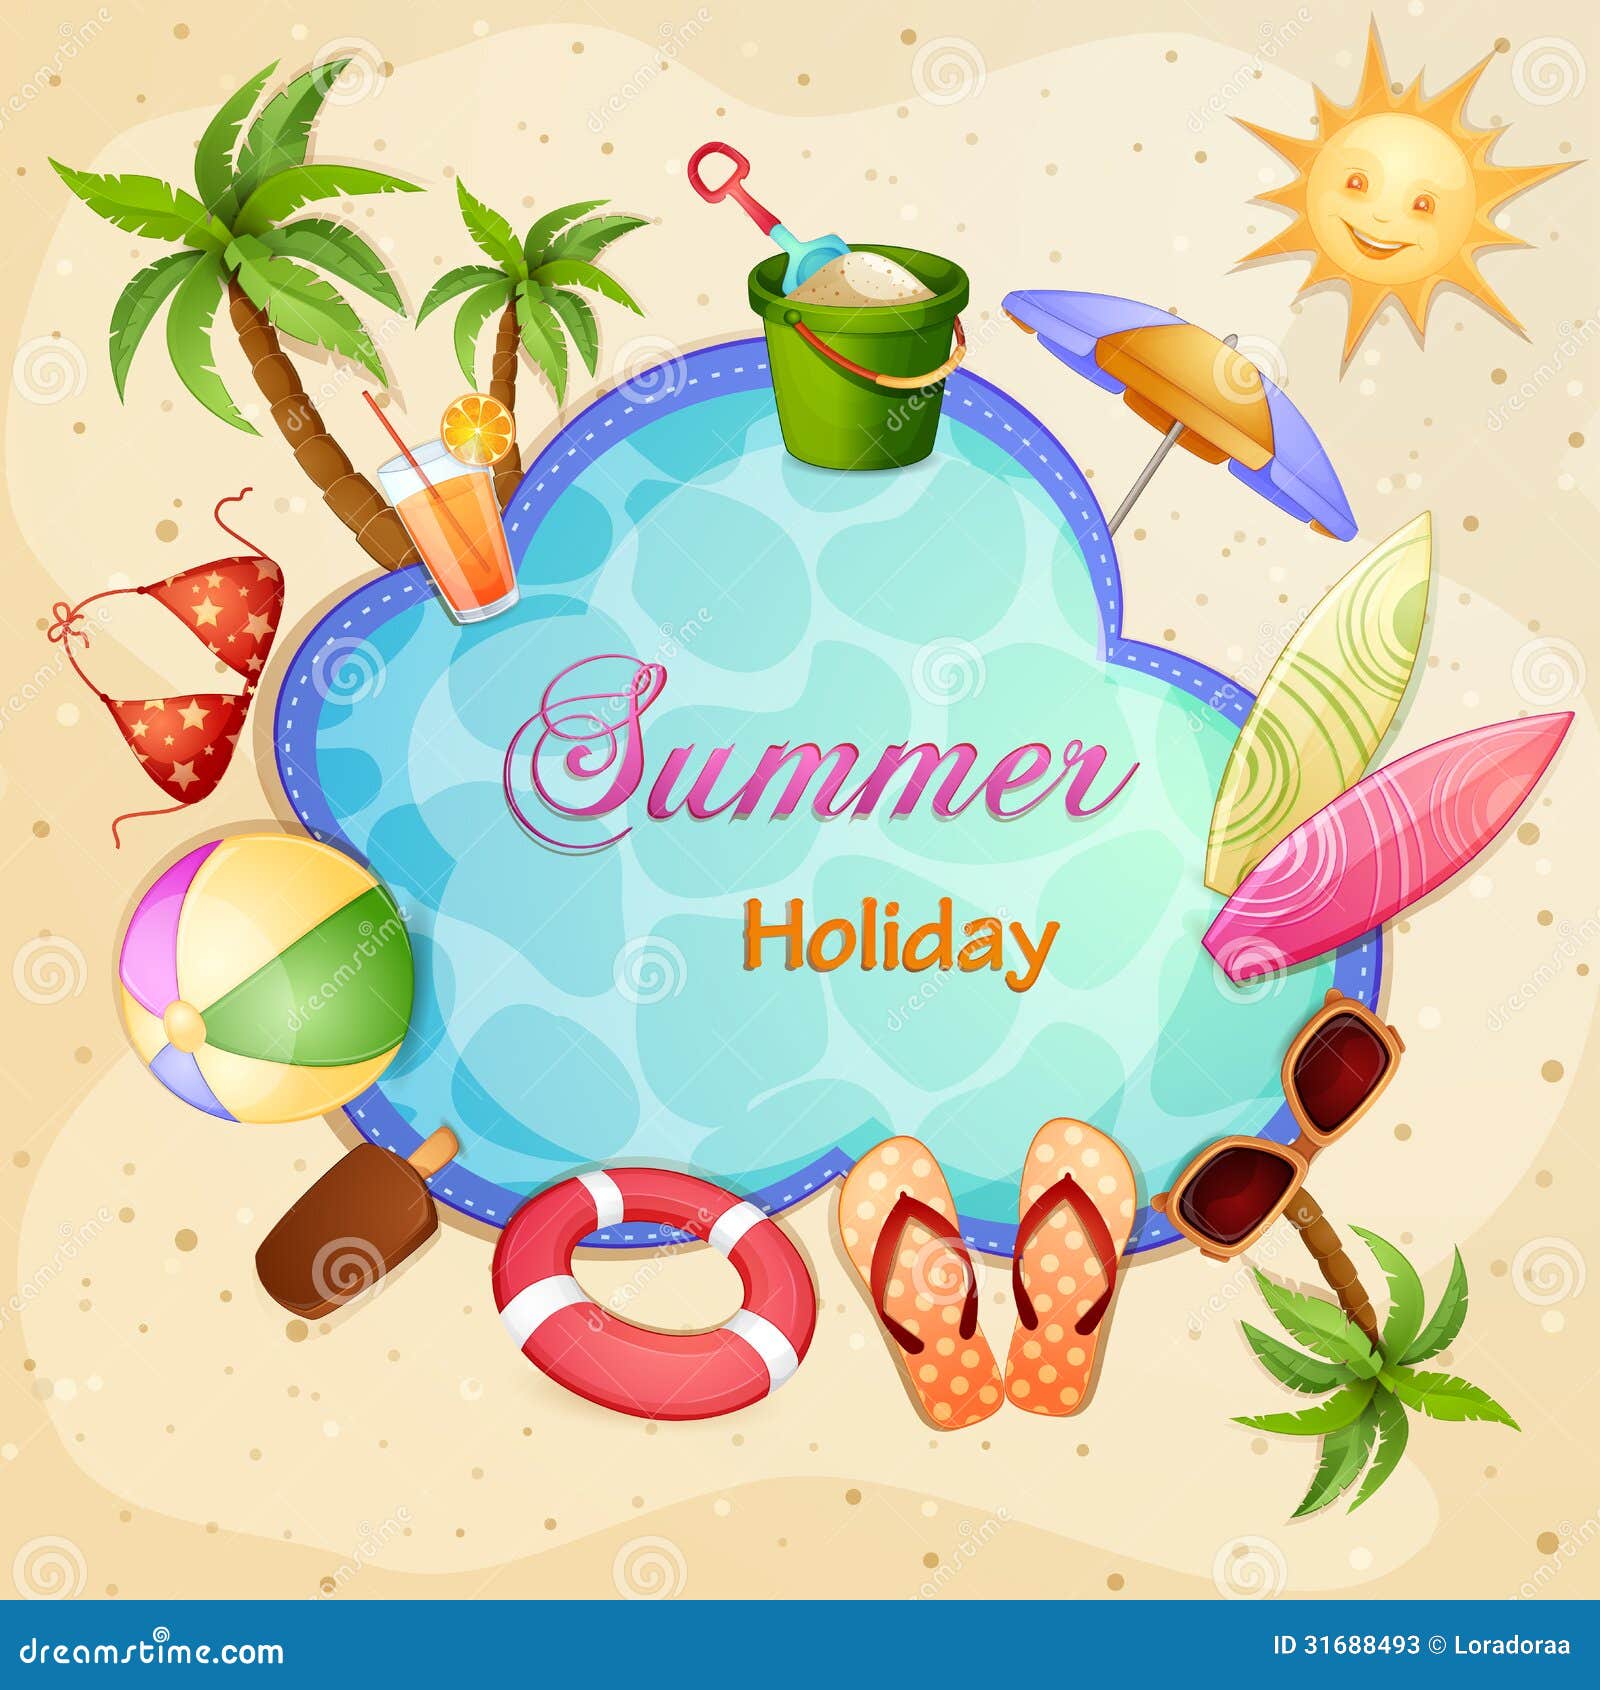 summer holiday clipart free images - photo #29